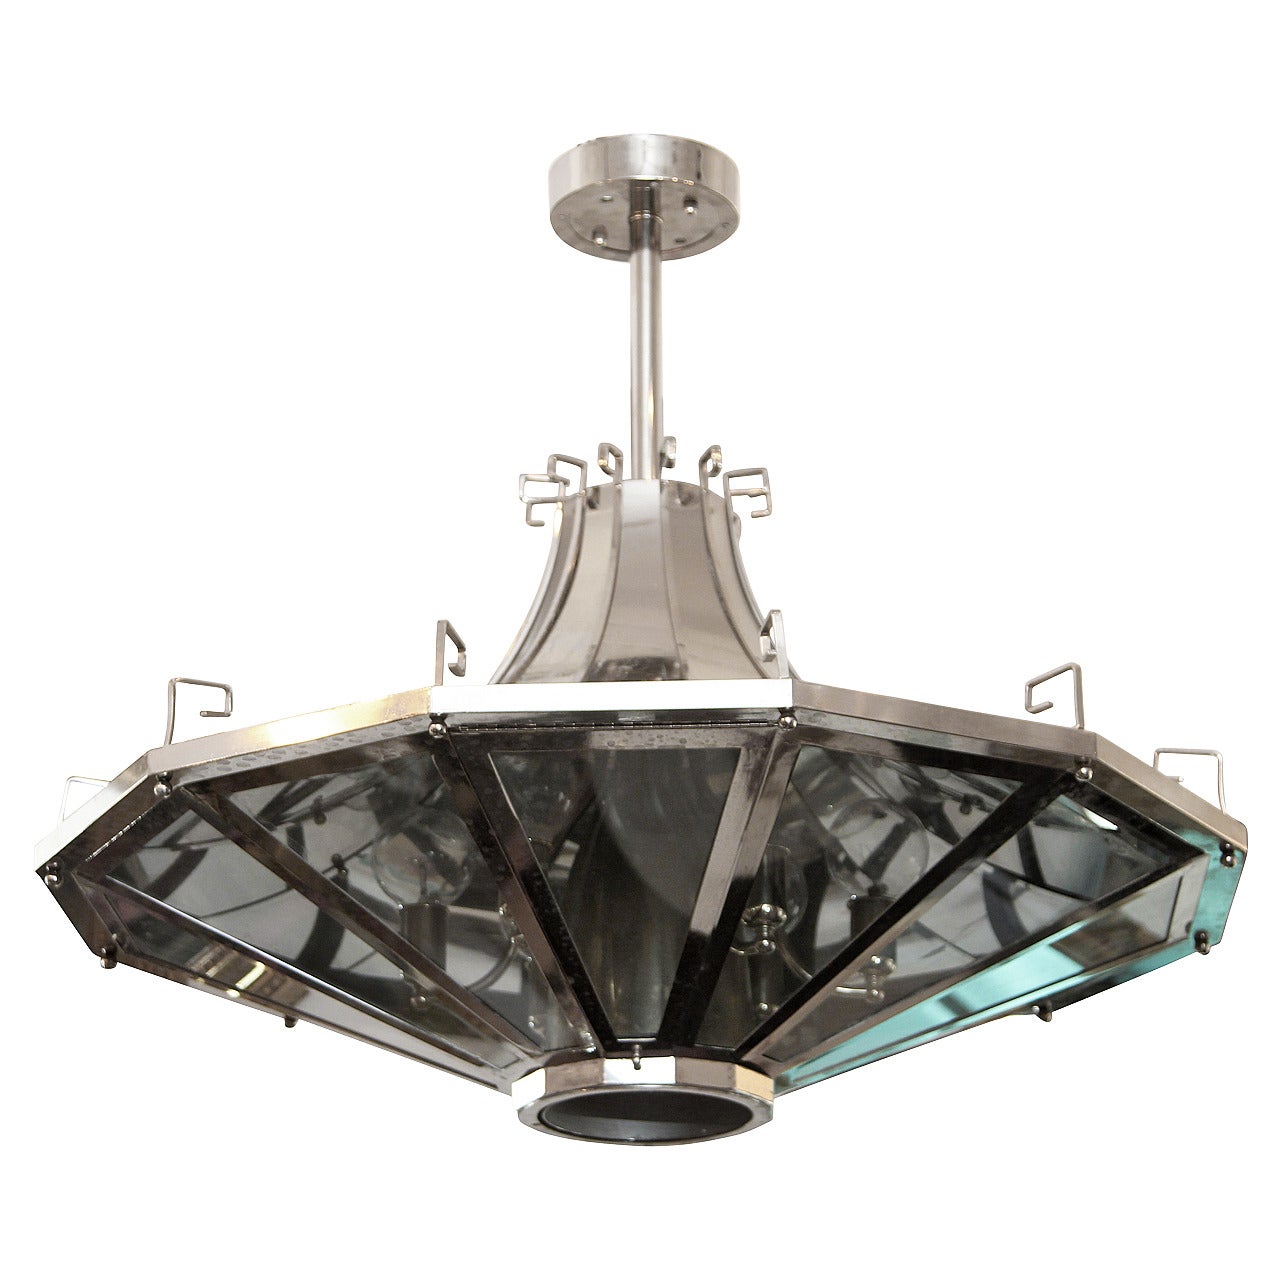 1950s French Mid-Century Modern Spaceship Light Fixture with Greek Detailing